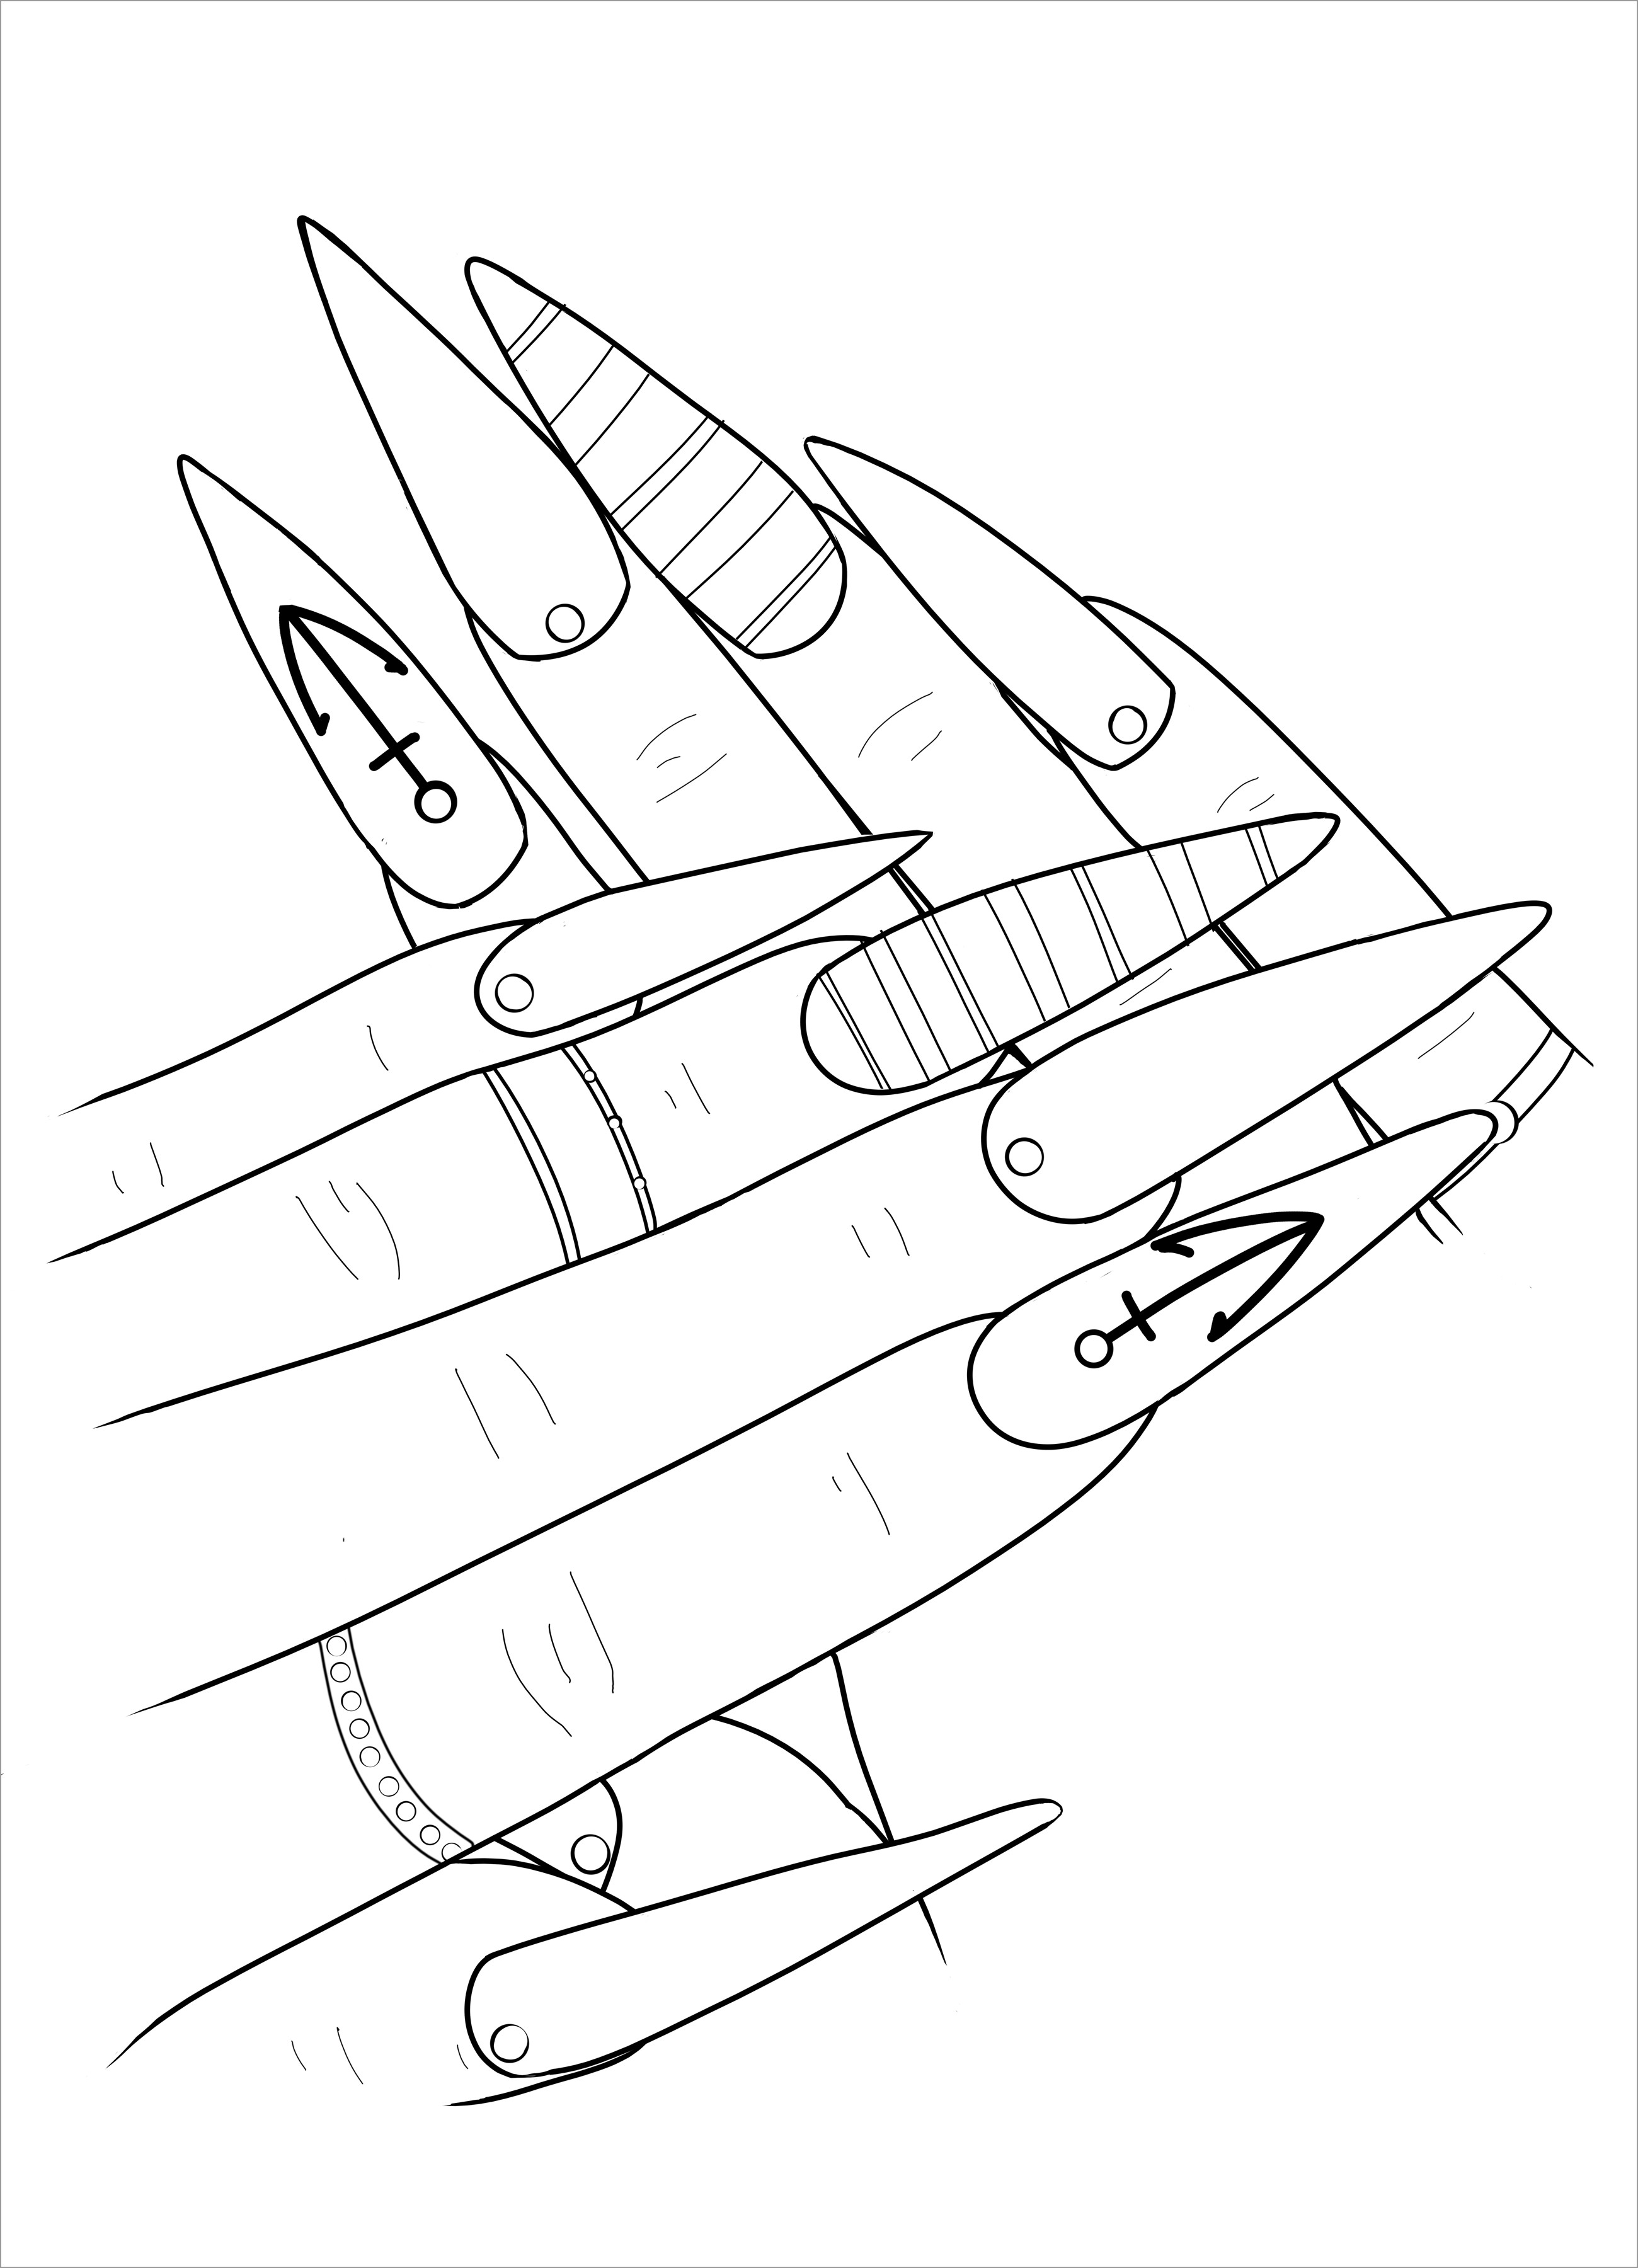 Nail Coloring Page for Kids